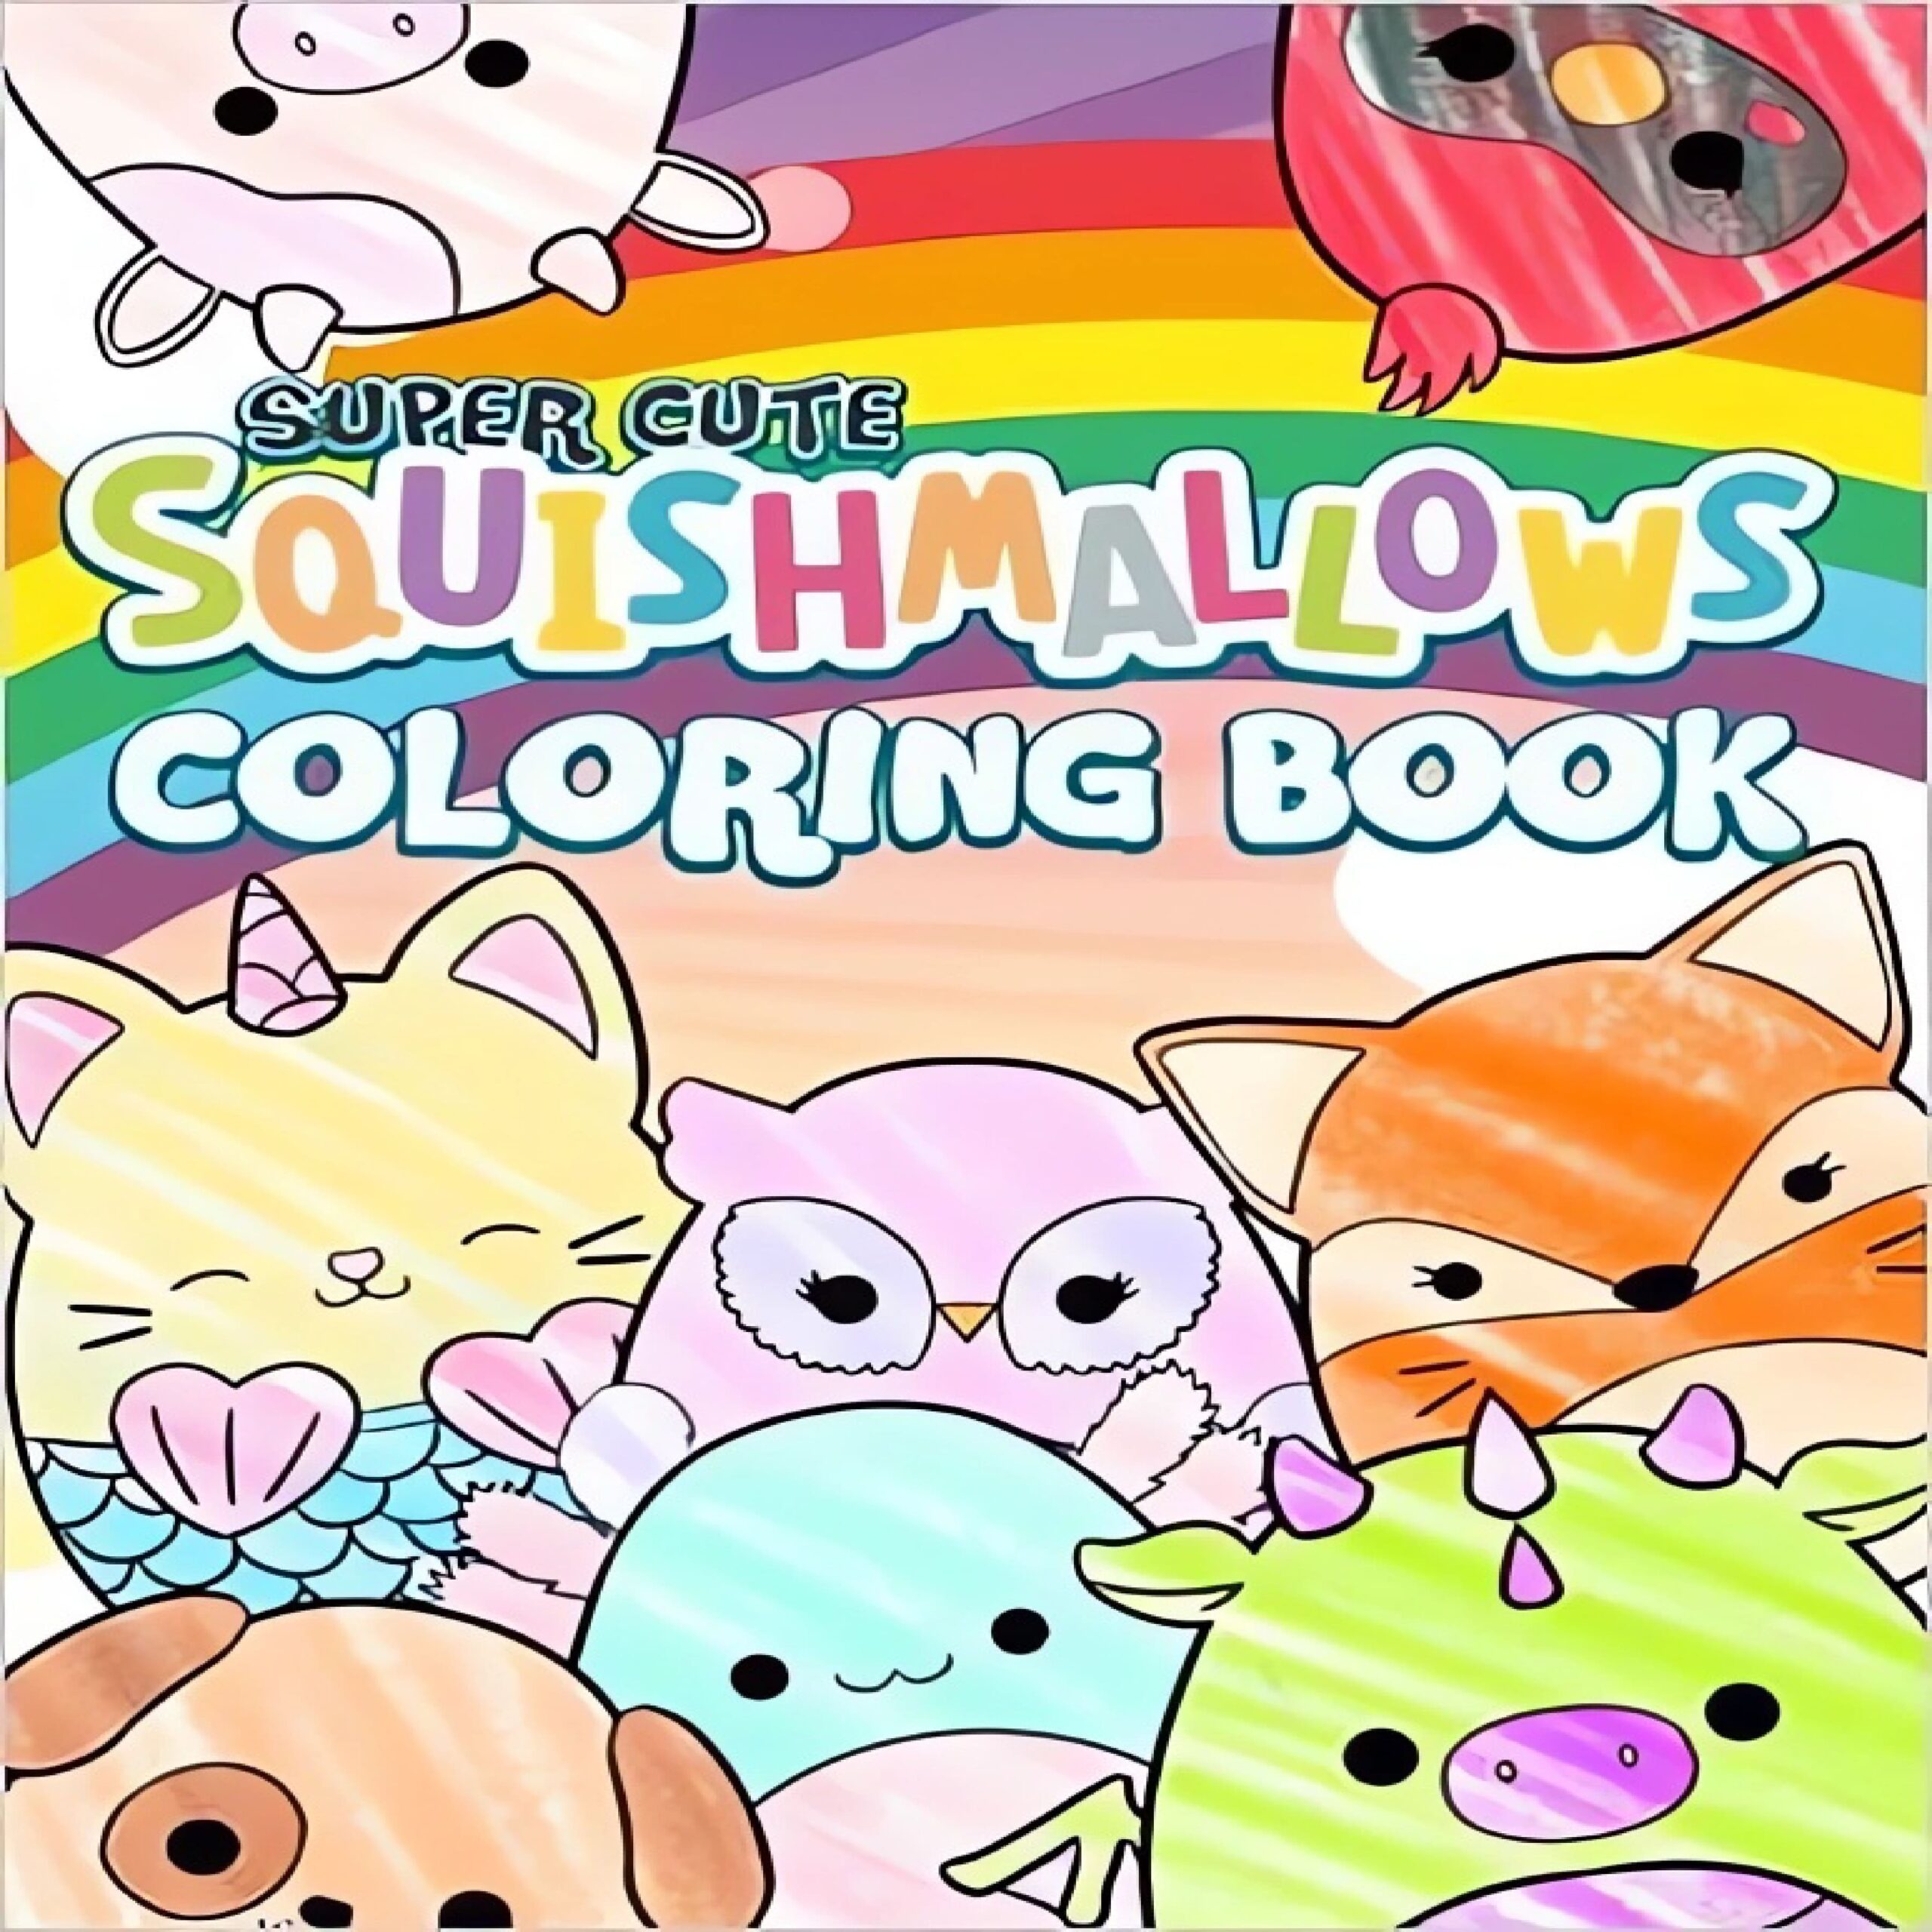 Super cute squishmallows coloring book adorable coloring book with cute animals for girls and boys made by teachers